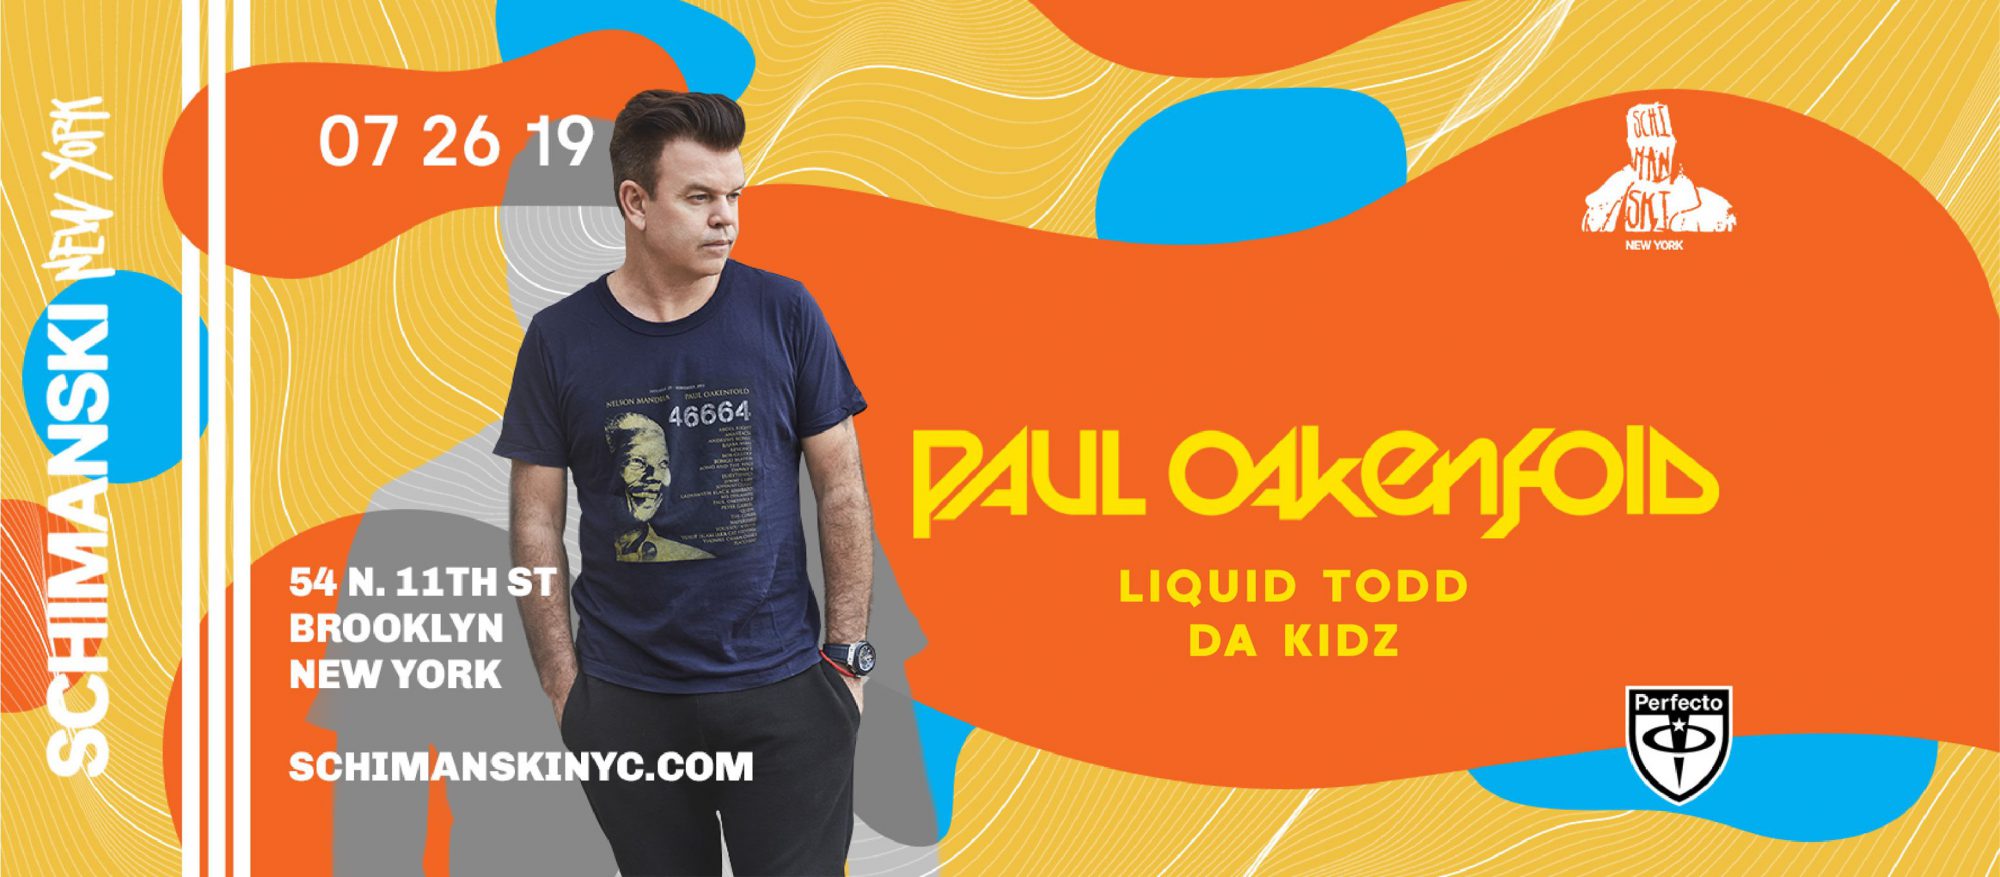 Paul Oakenfold To Bring Nyc A Trance Filled Night At Schimanski Edm Identity